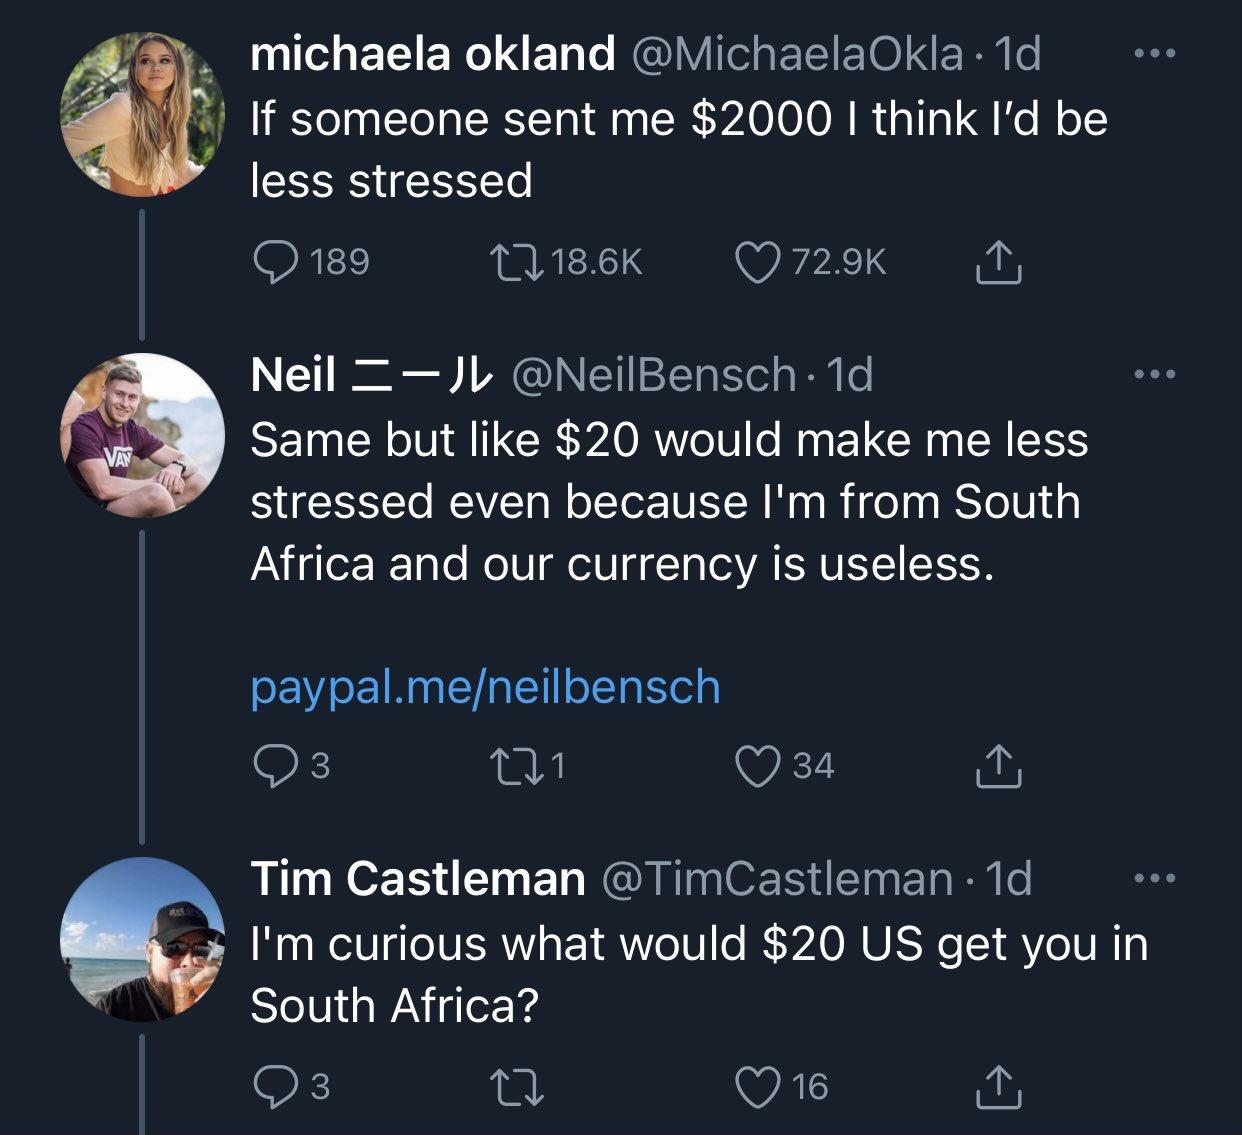 Wholesome Chaotic Good helps out South African man in need (1/4)